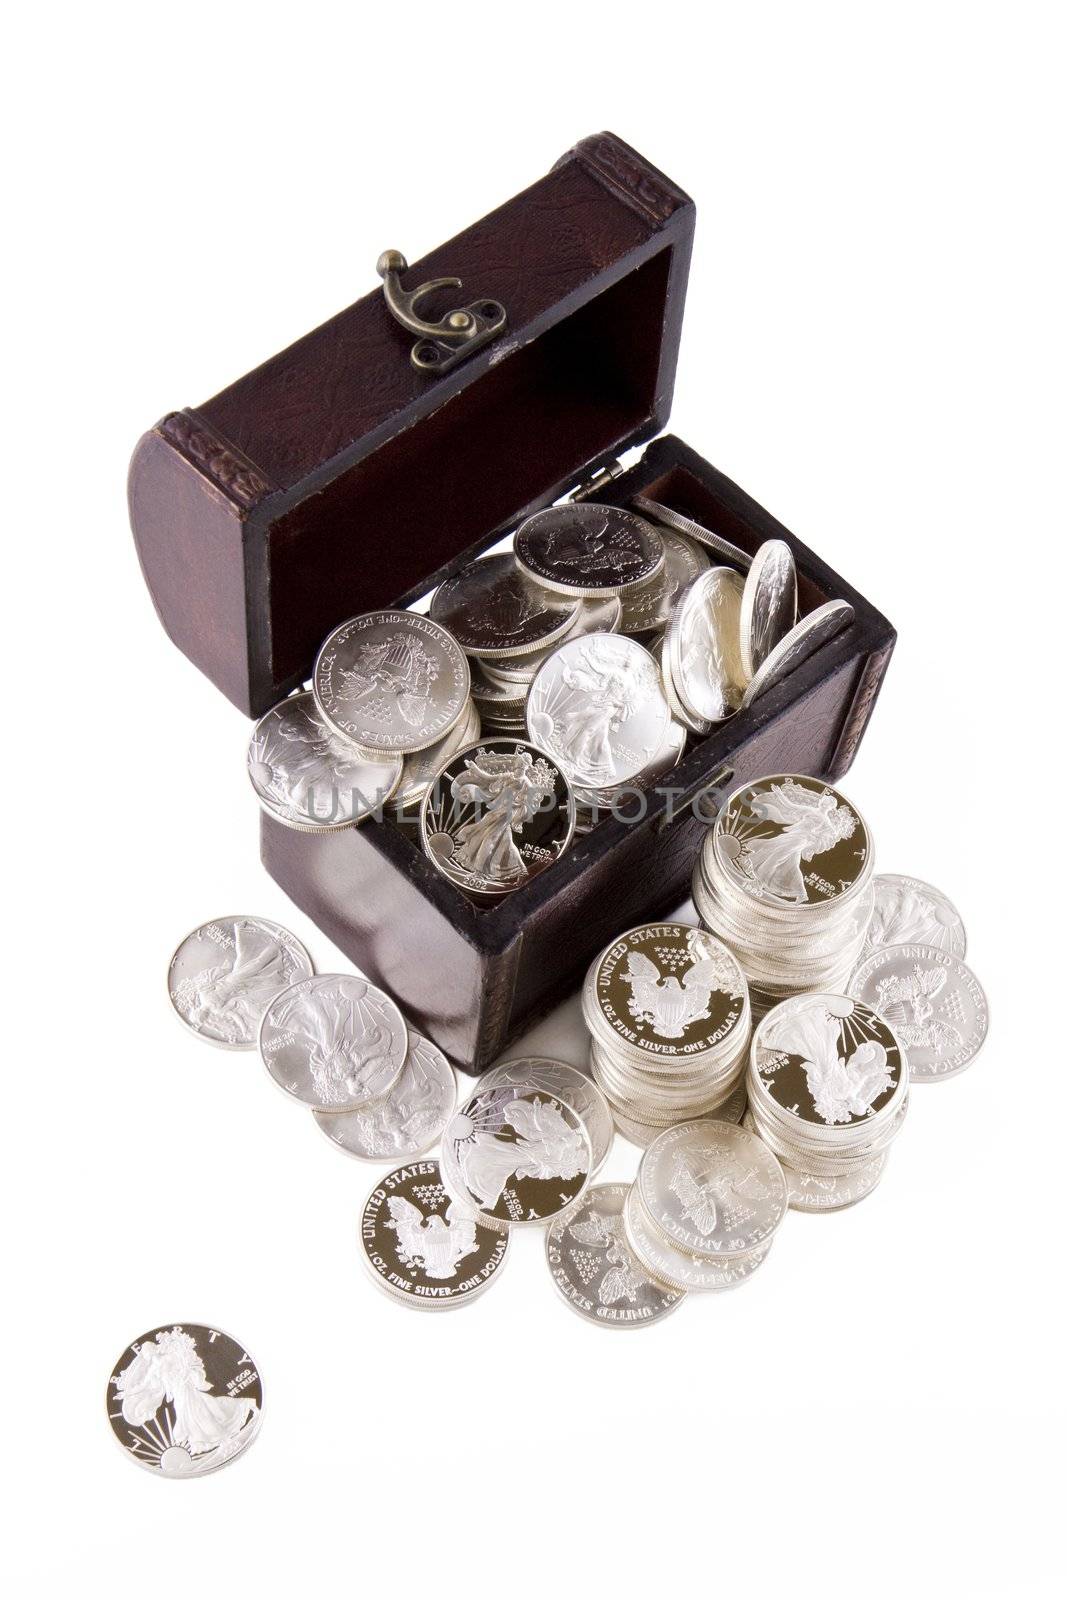 Case and silver coins by Gbuglok